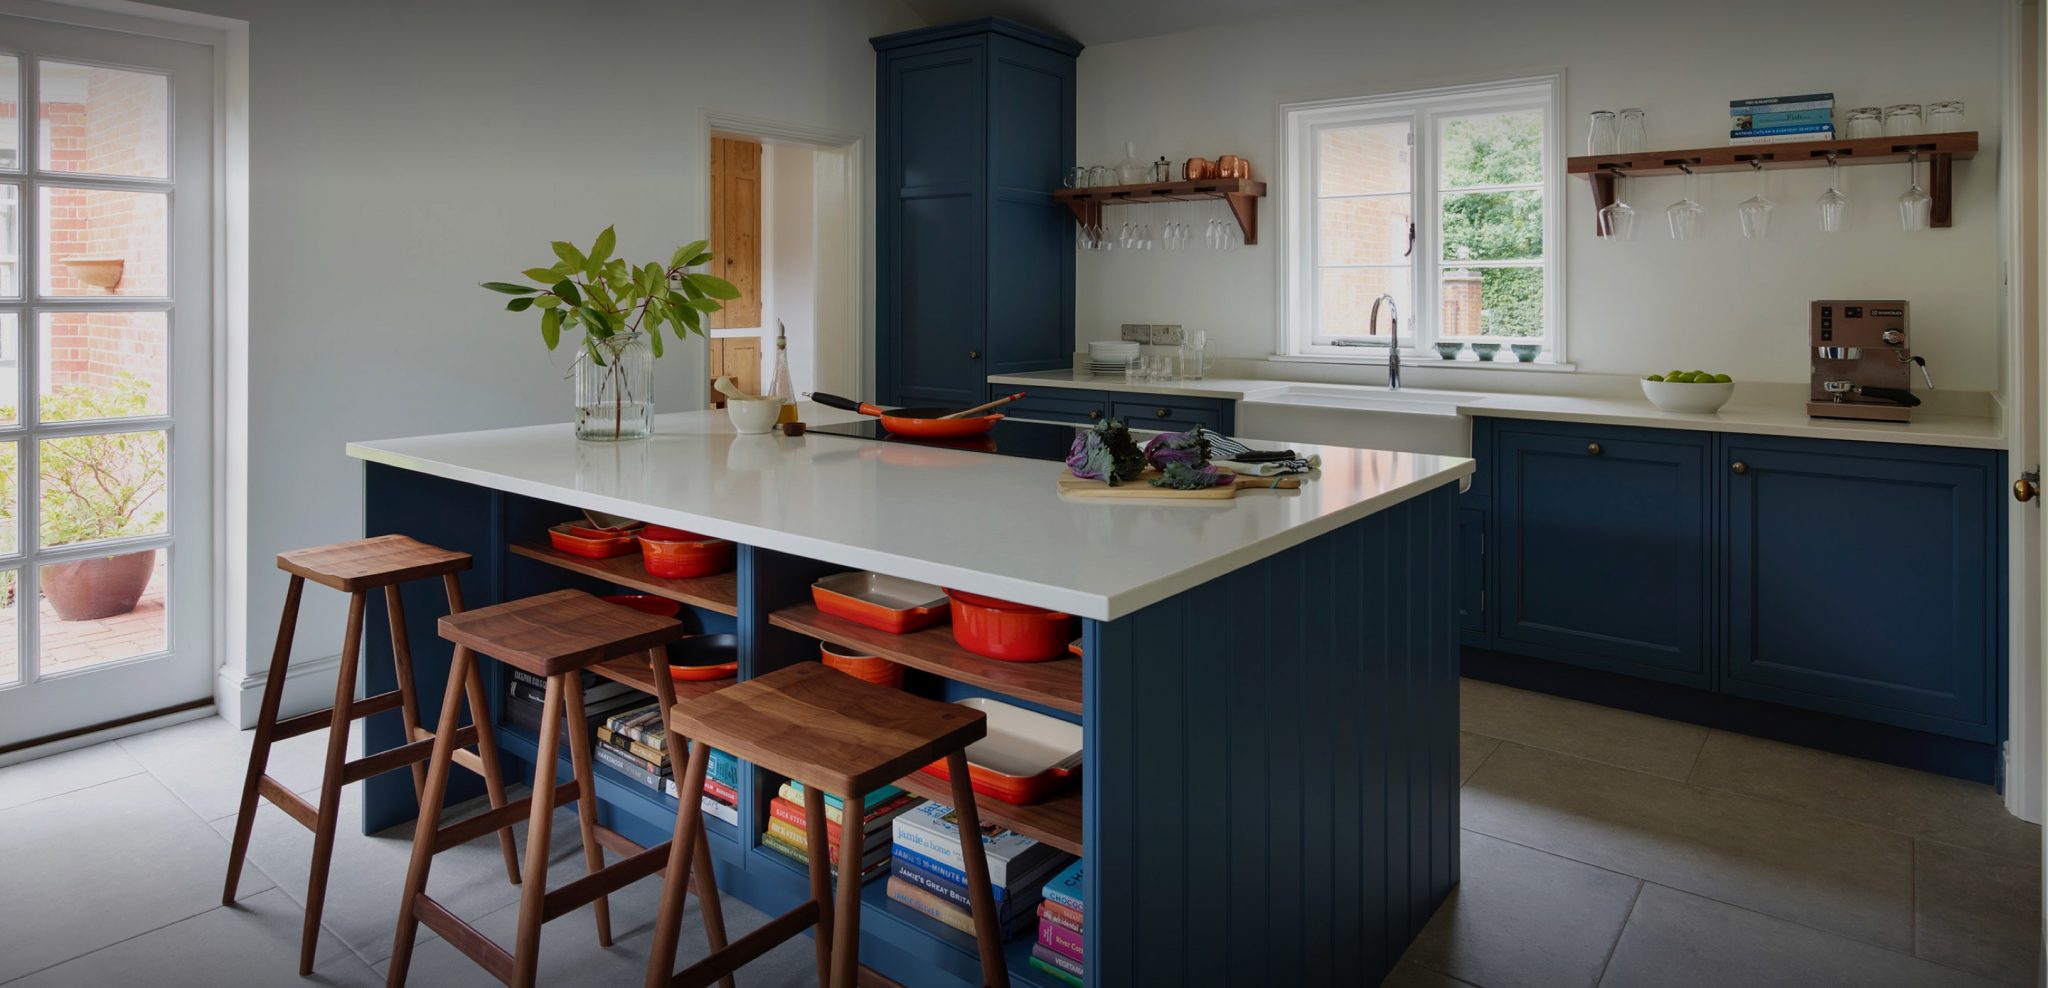 Blue hand-made traditional kitchen with white porcelain worktop and butlers sink with window view and high timber seating